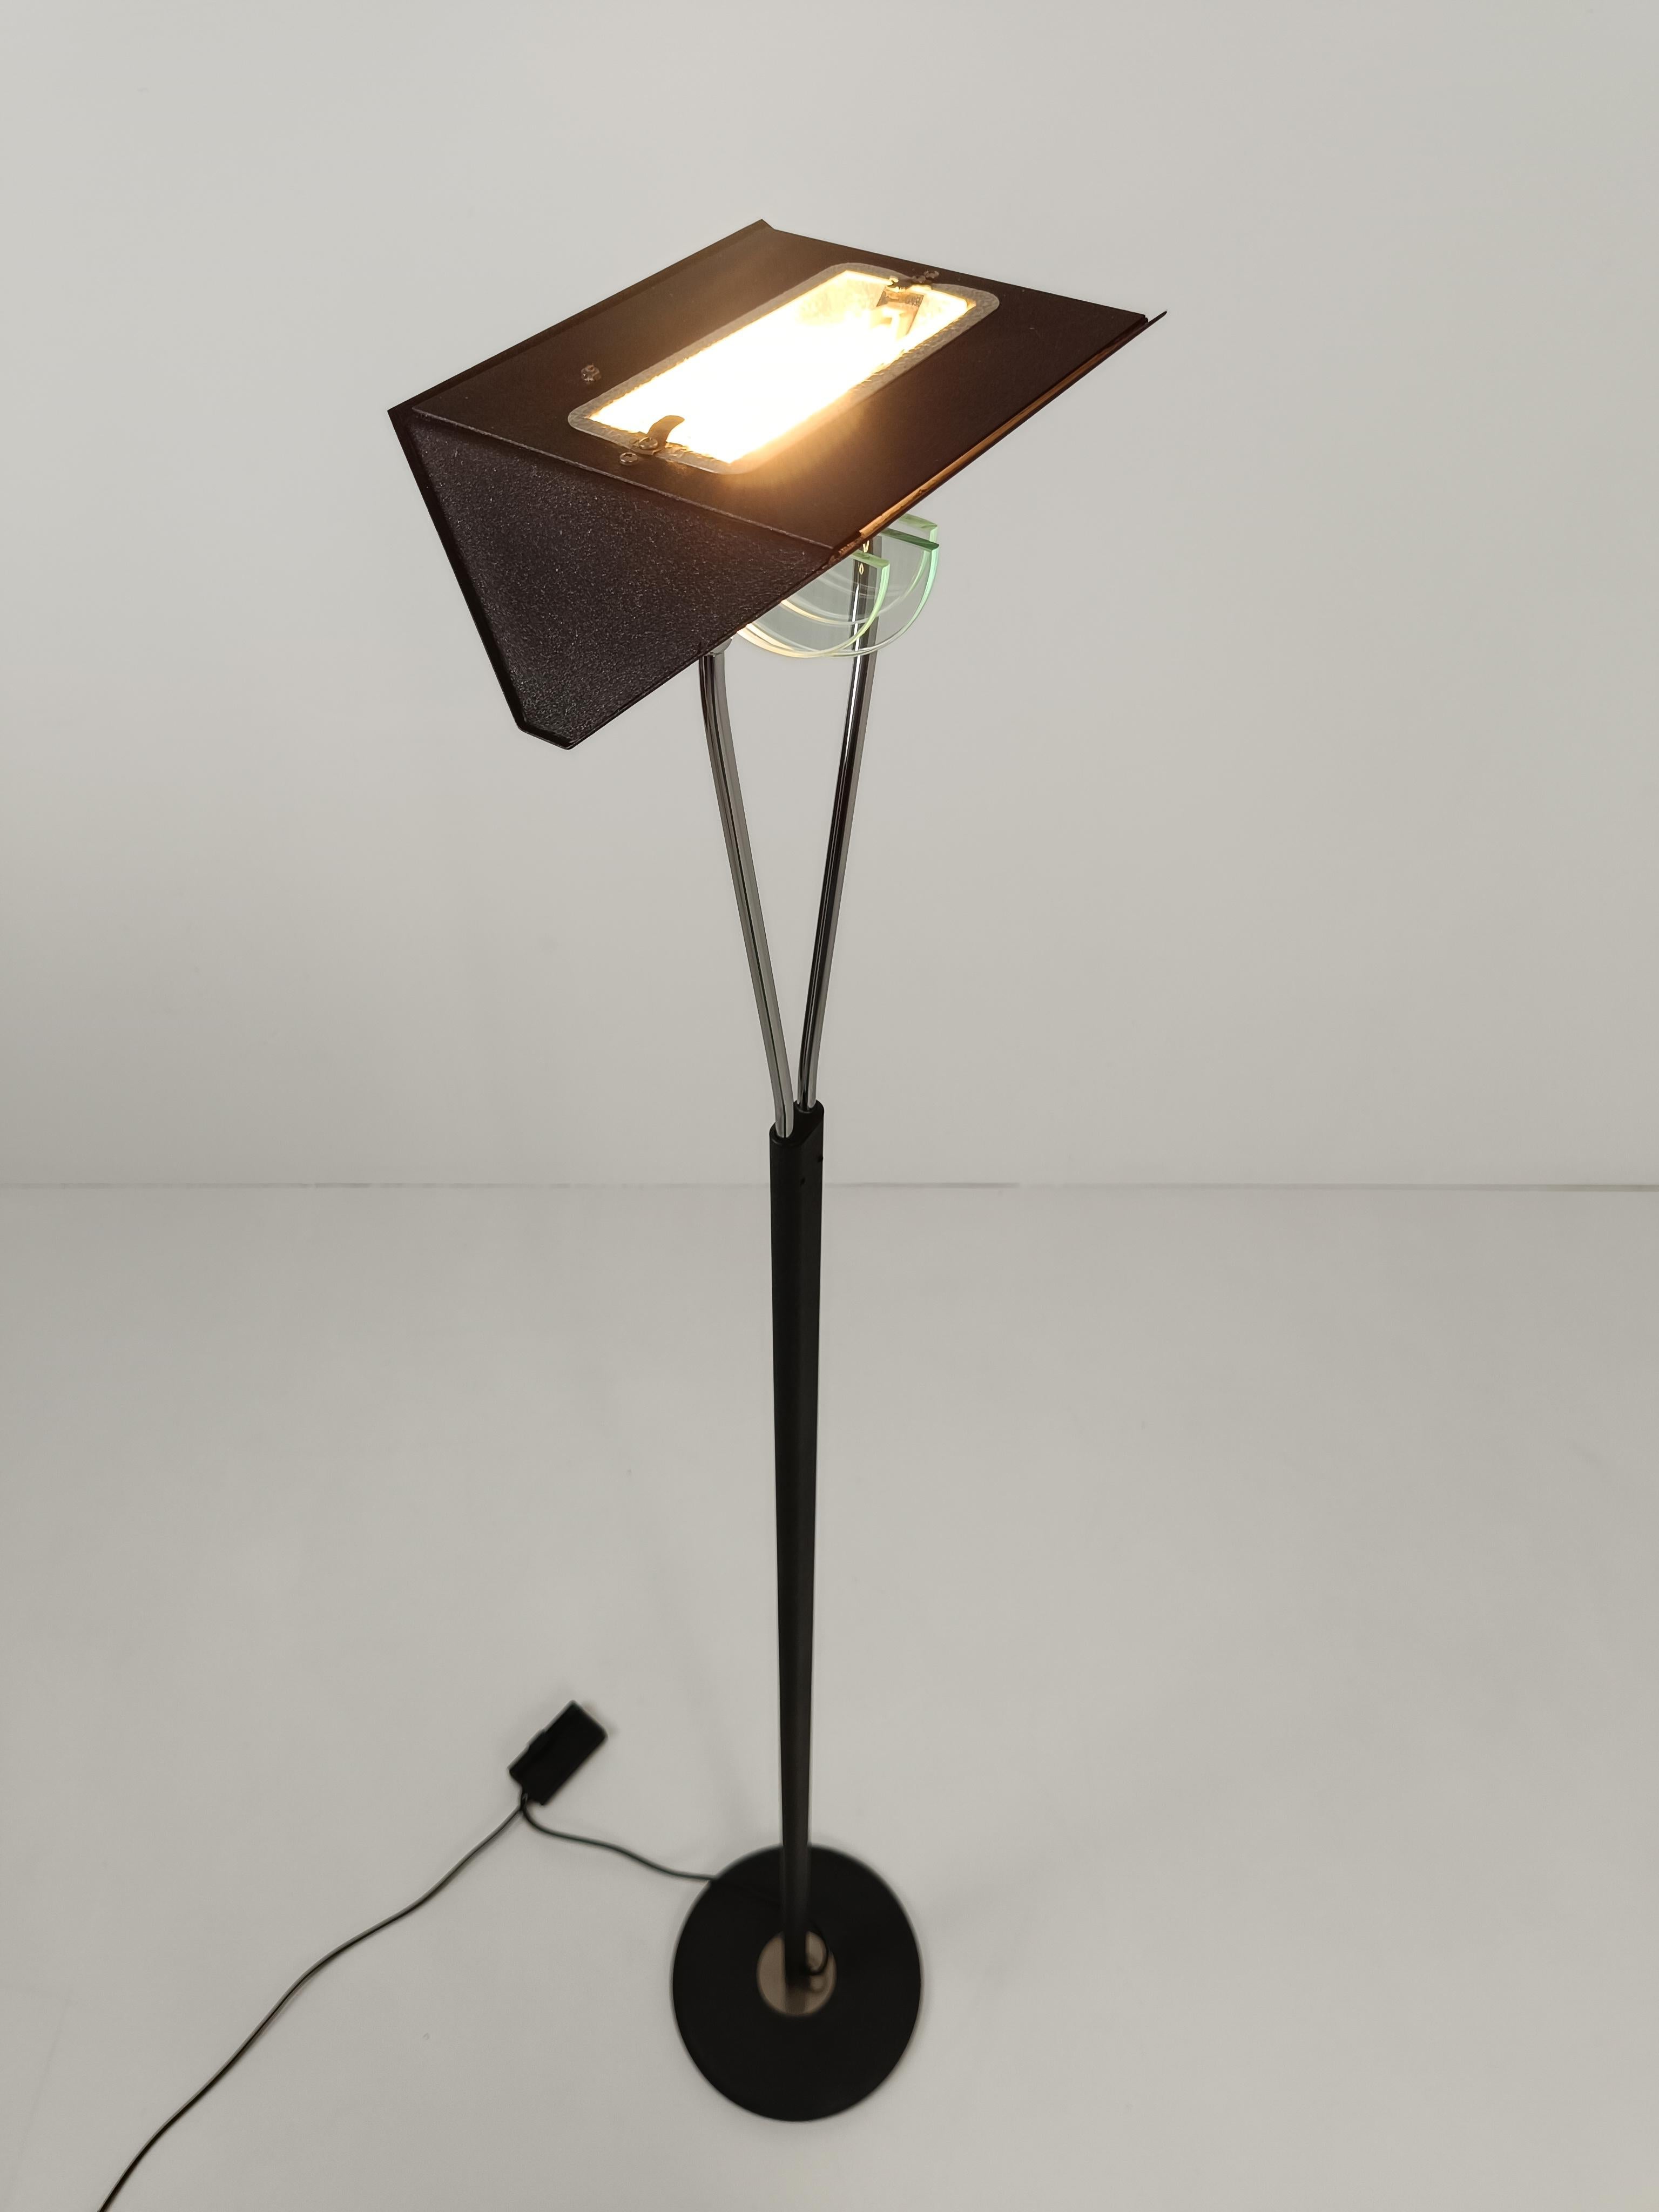 Late 20th Century Italian Post modern Floor Lamp in the Style of Fontana Arte, 80s / 90s  For Sale